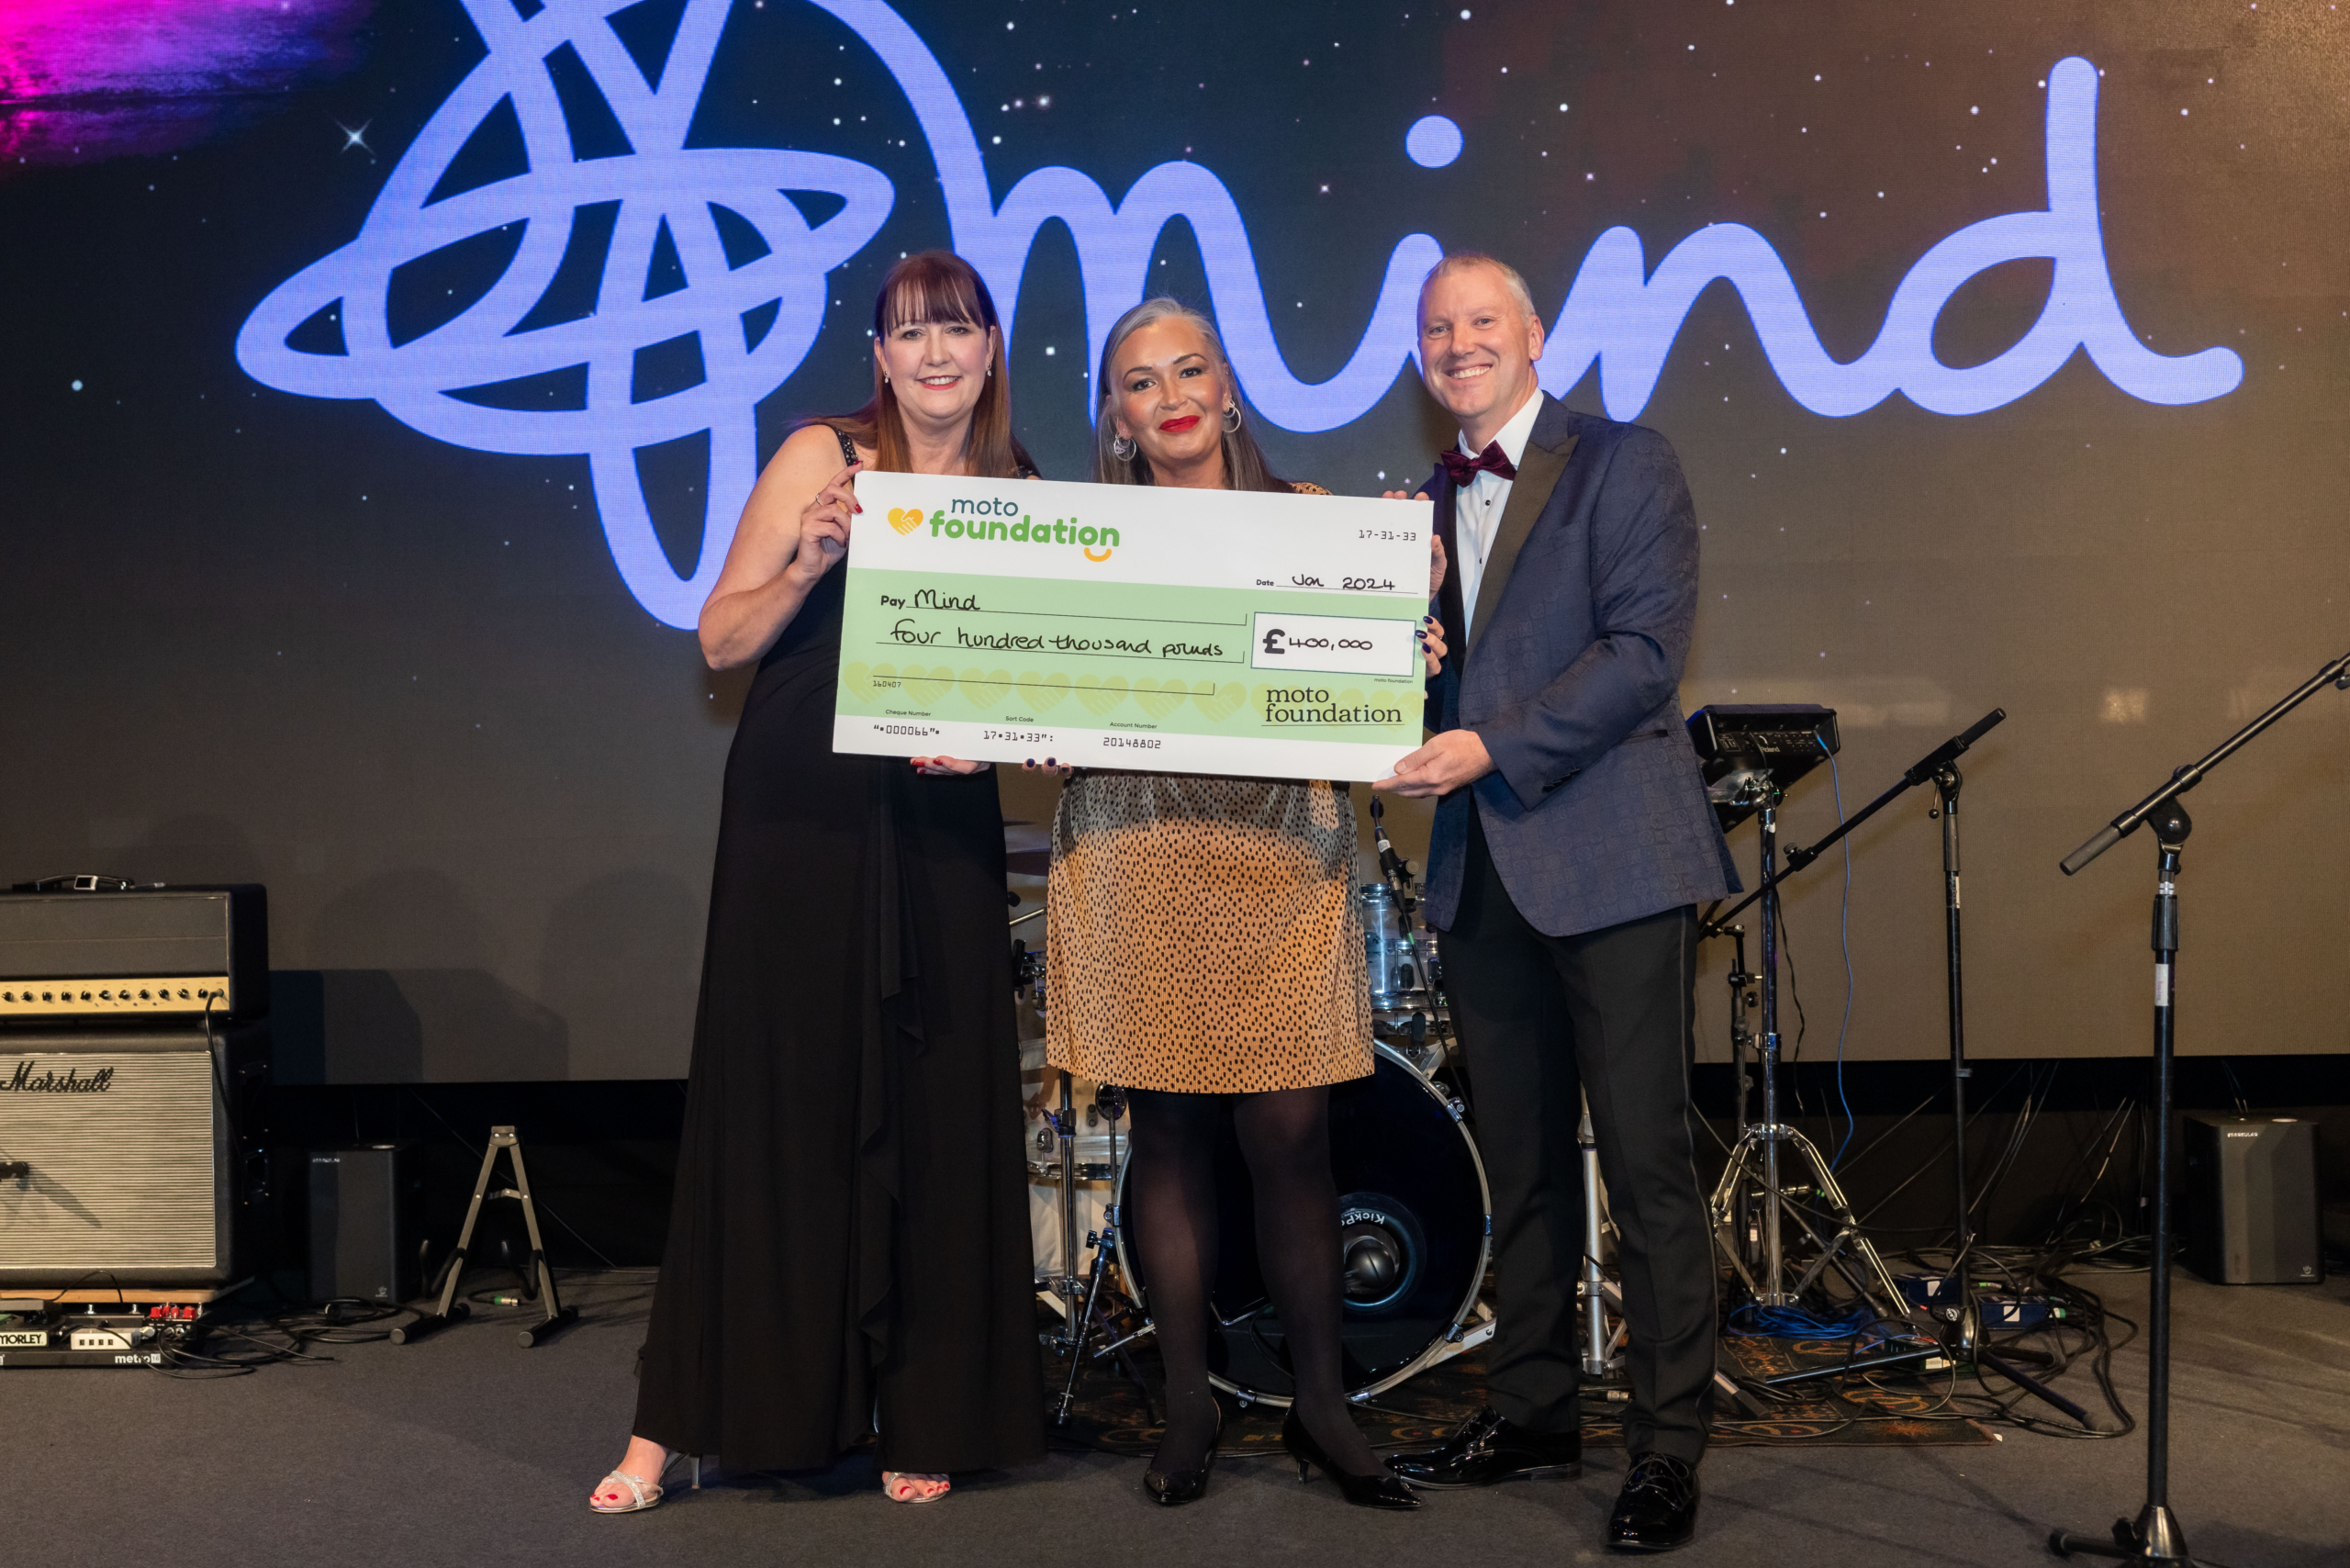 Fuelling hope: Moto Foundation smashes fundraising target, raising £400,000 for Mind in year two of partnership